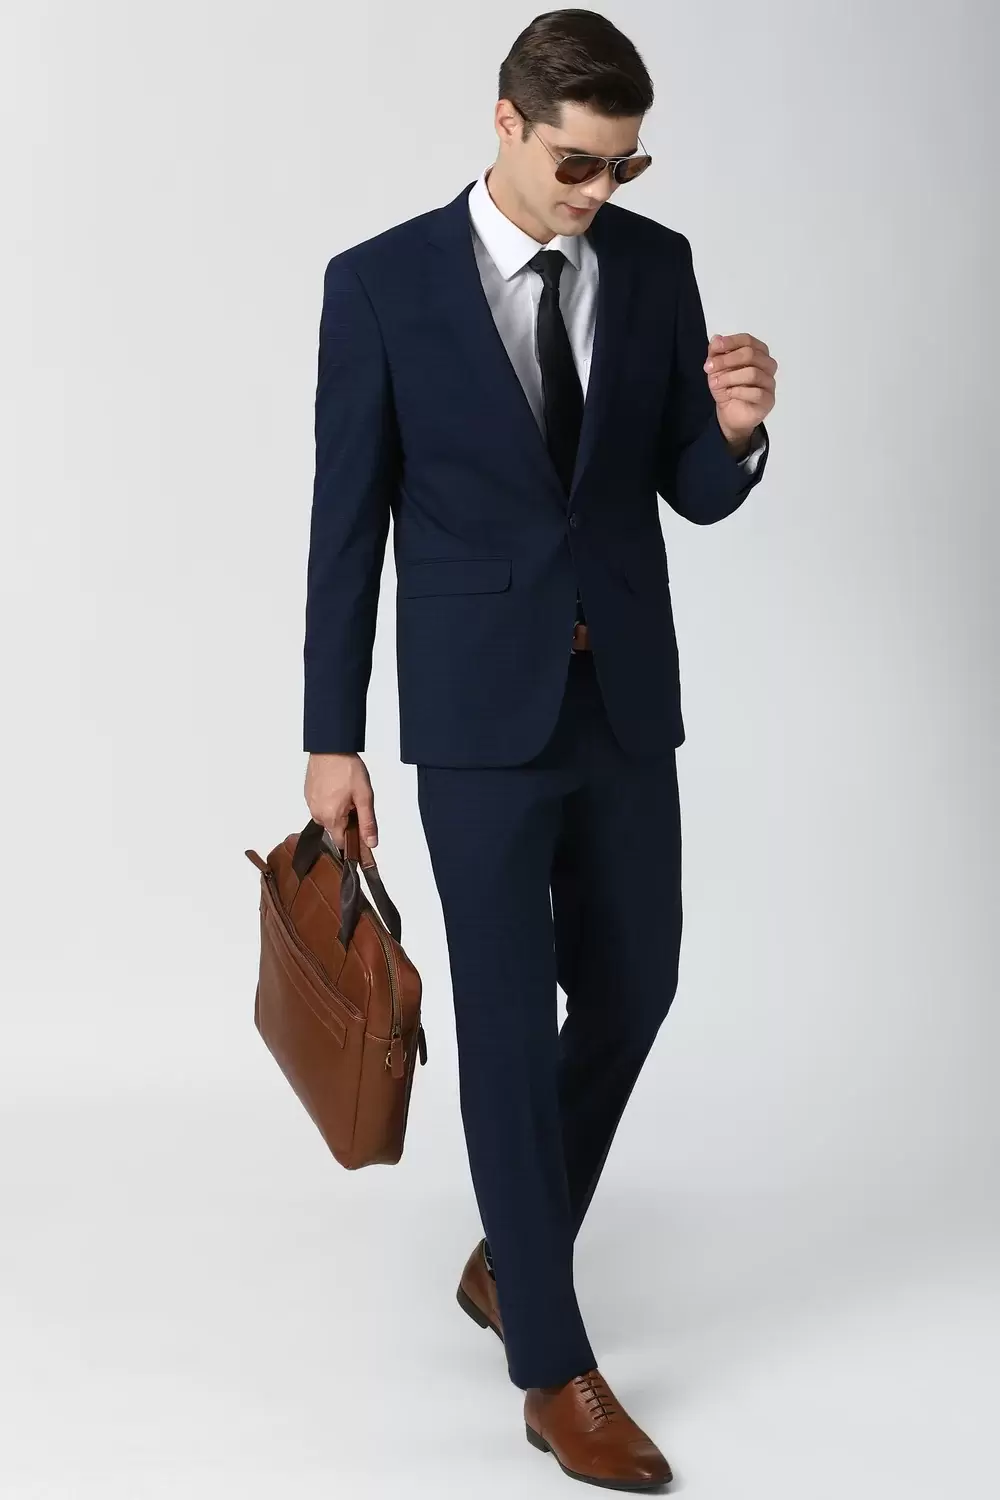 Discover more than 179 peter england wedding suits best